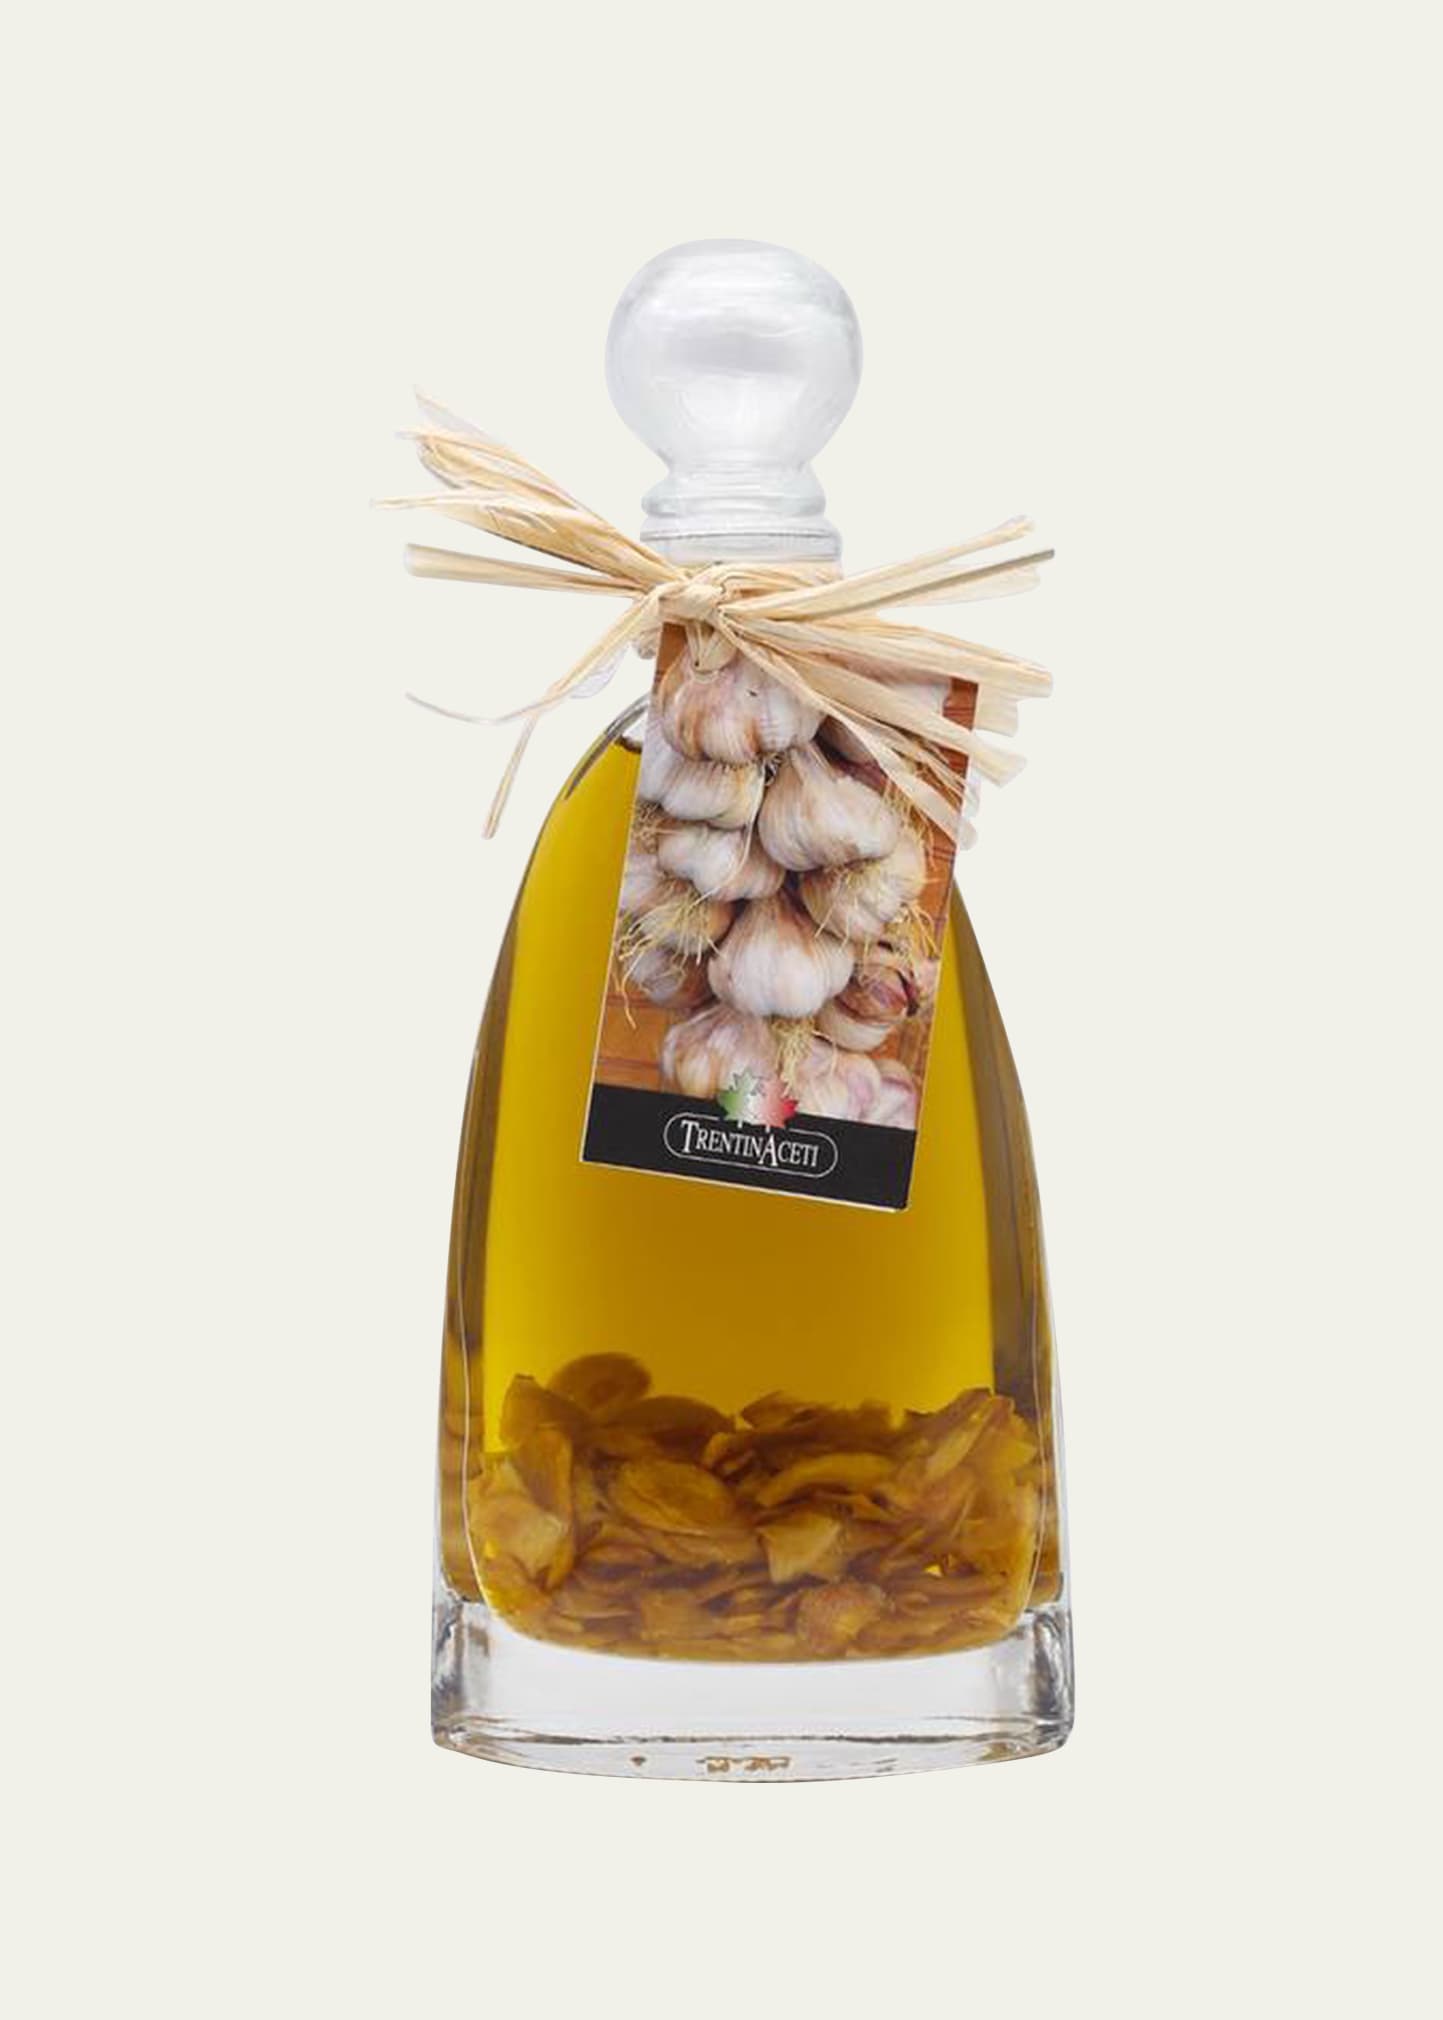 6.76 oz. Aromatic Extra Virgin Olive with Garlic